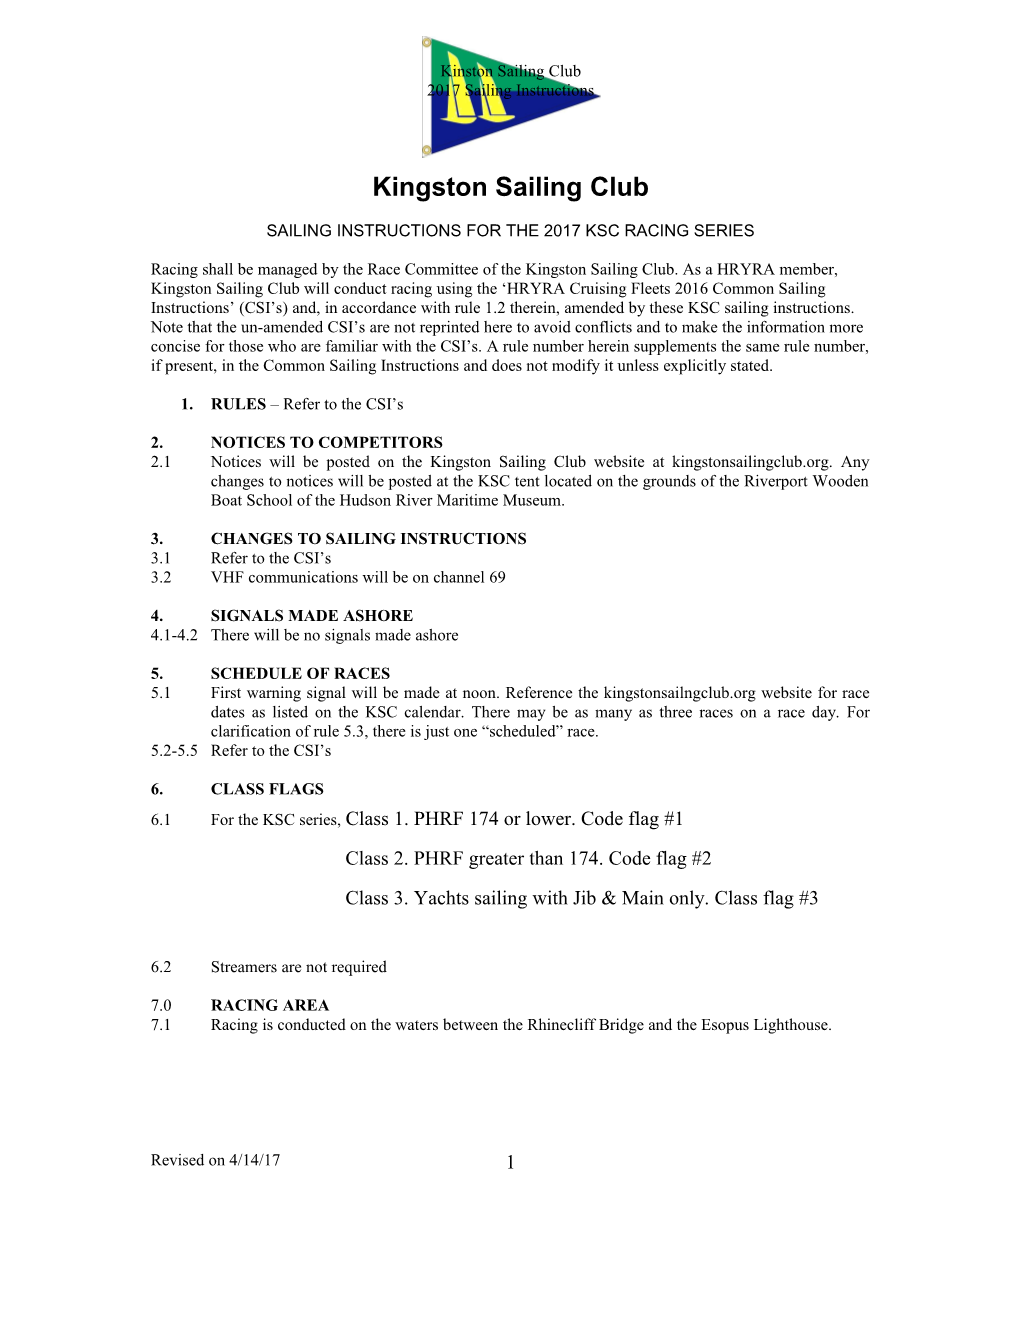 Sailing Instructions for the 2017 Ksc Racing Series